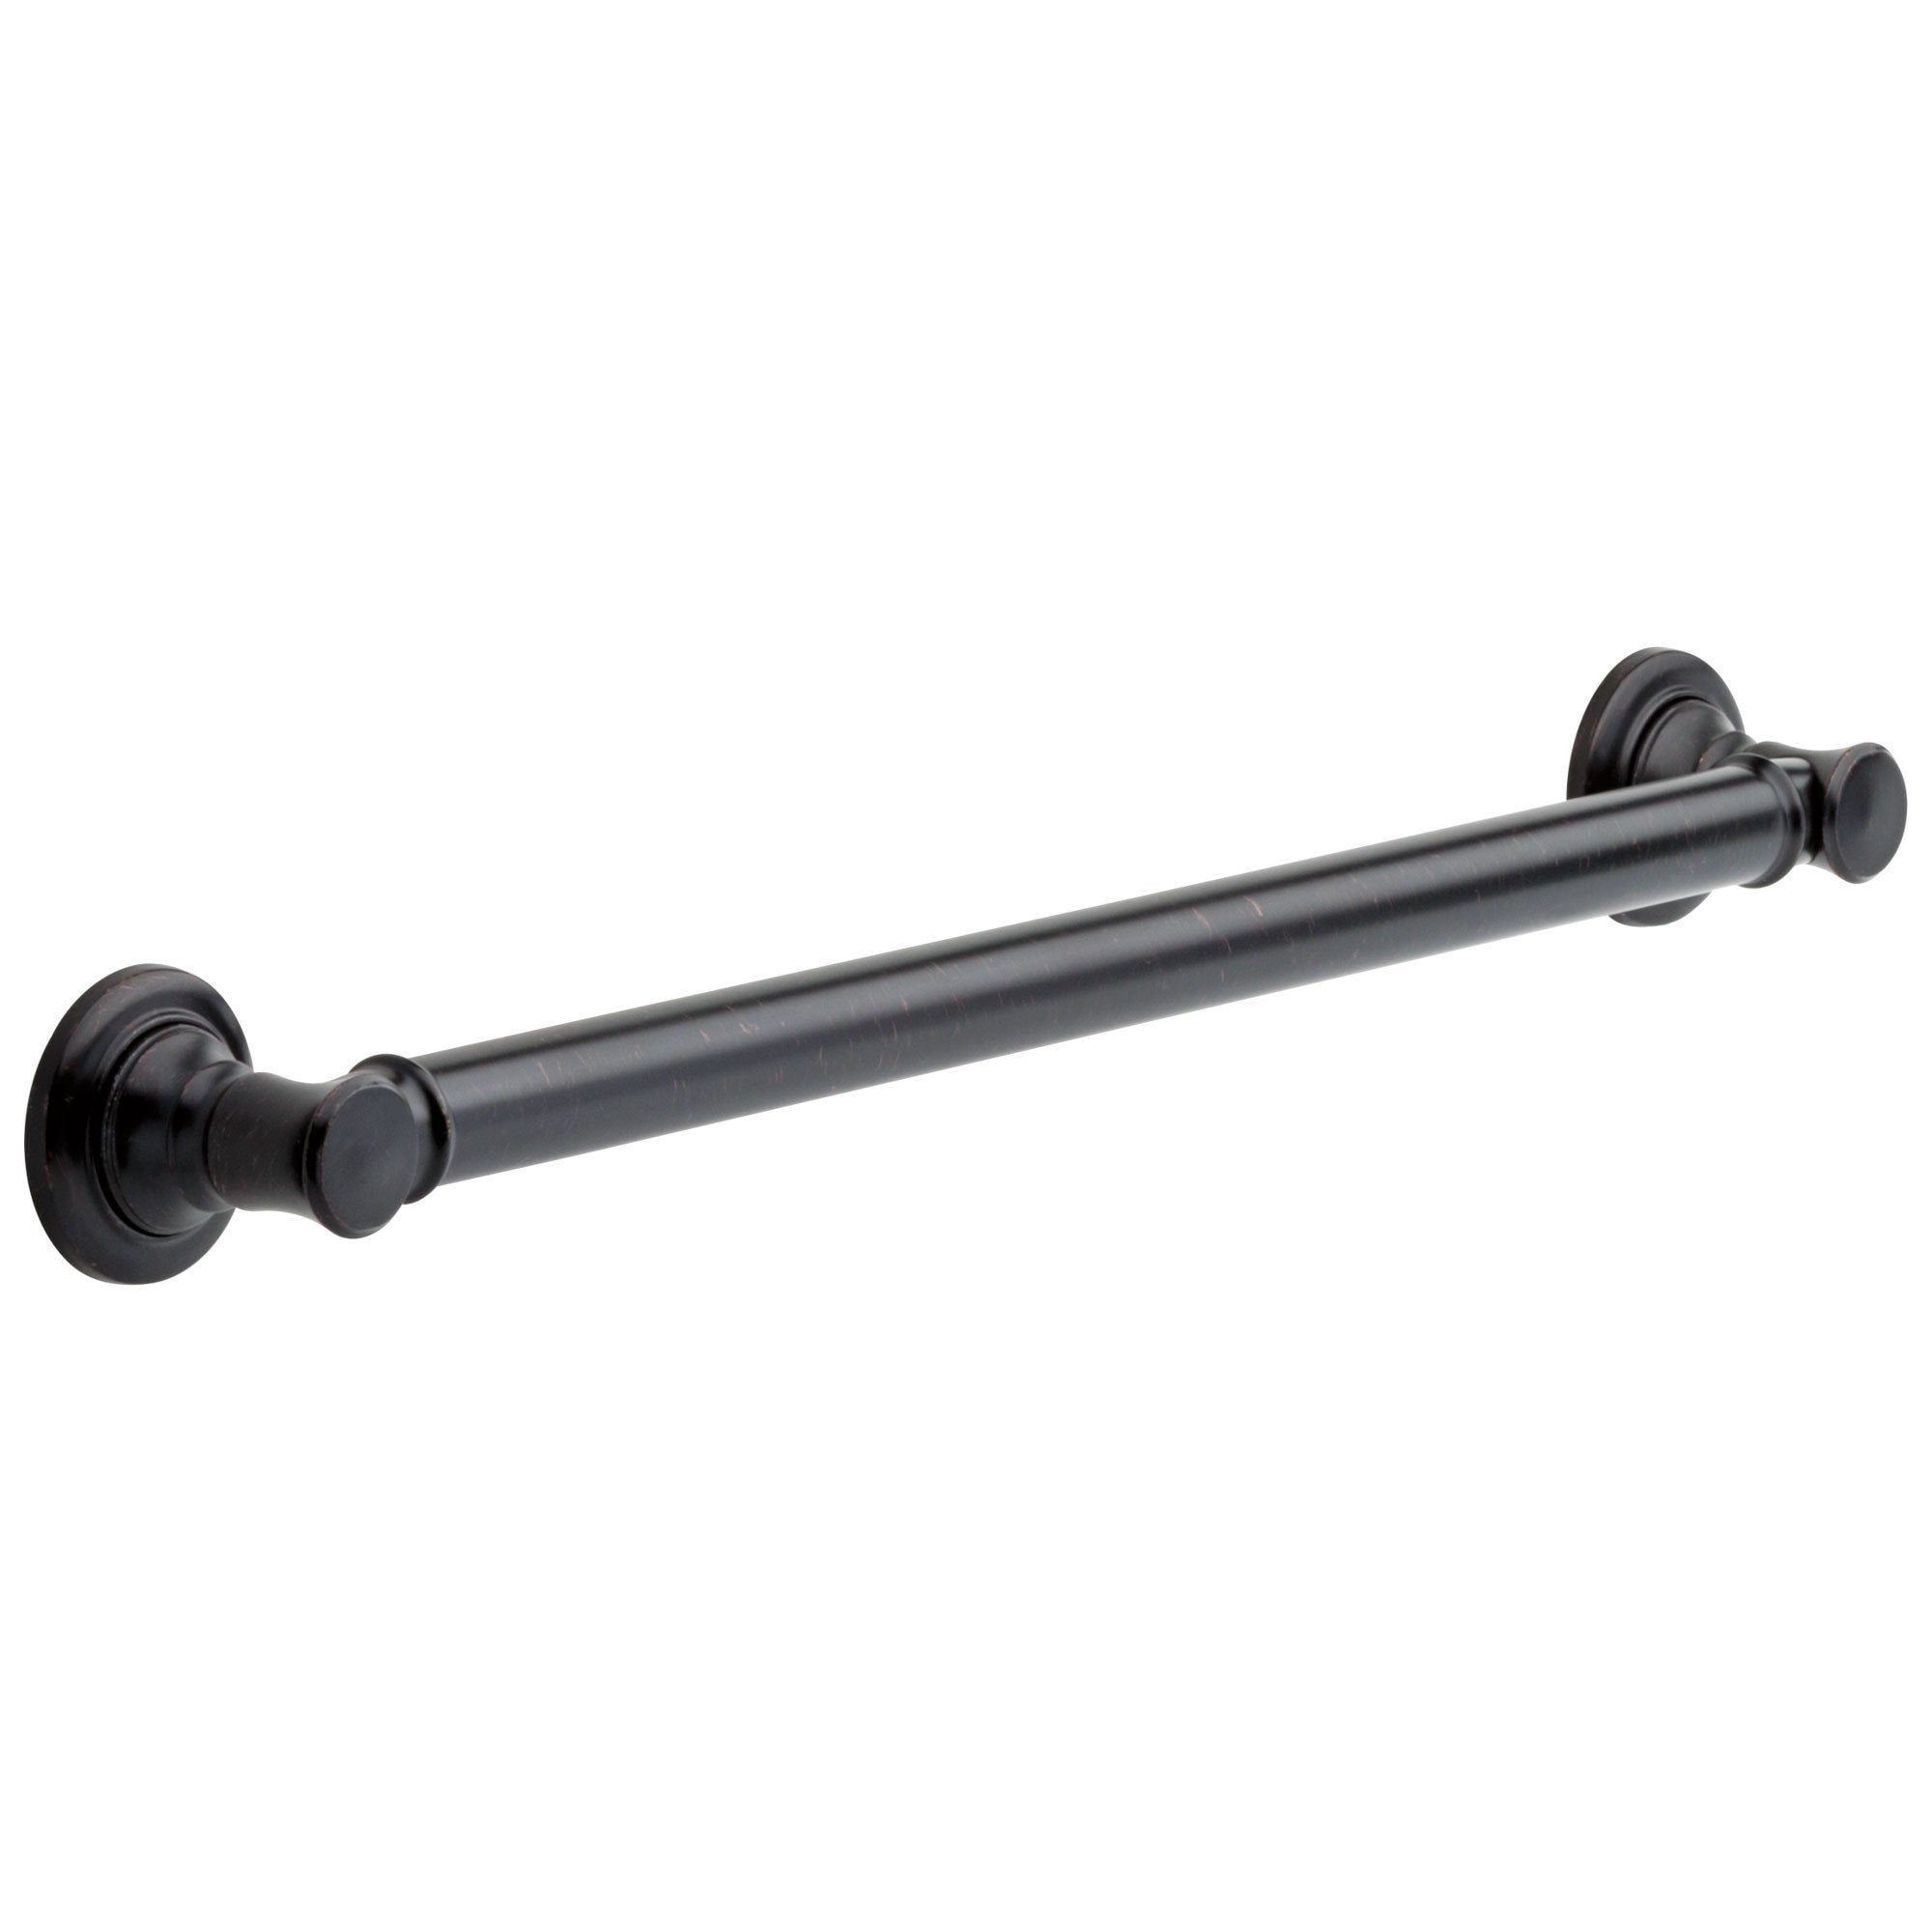 Delta Bath Safety Collection Venetian Bronze Finish Traditional Decorative Style Standard ADA Approved Grab Bar - 24" D41624RB